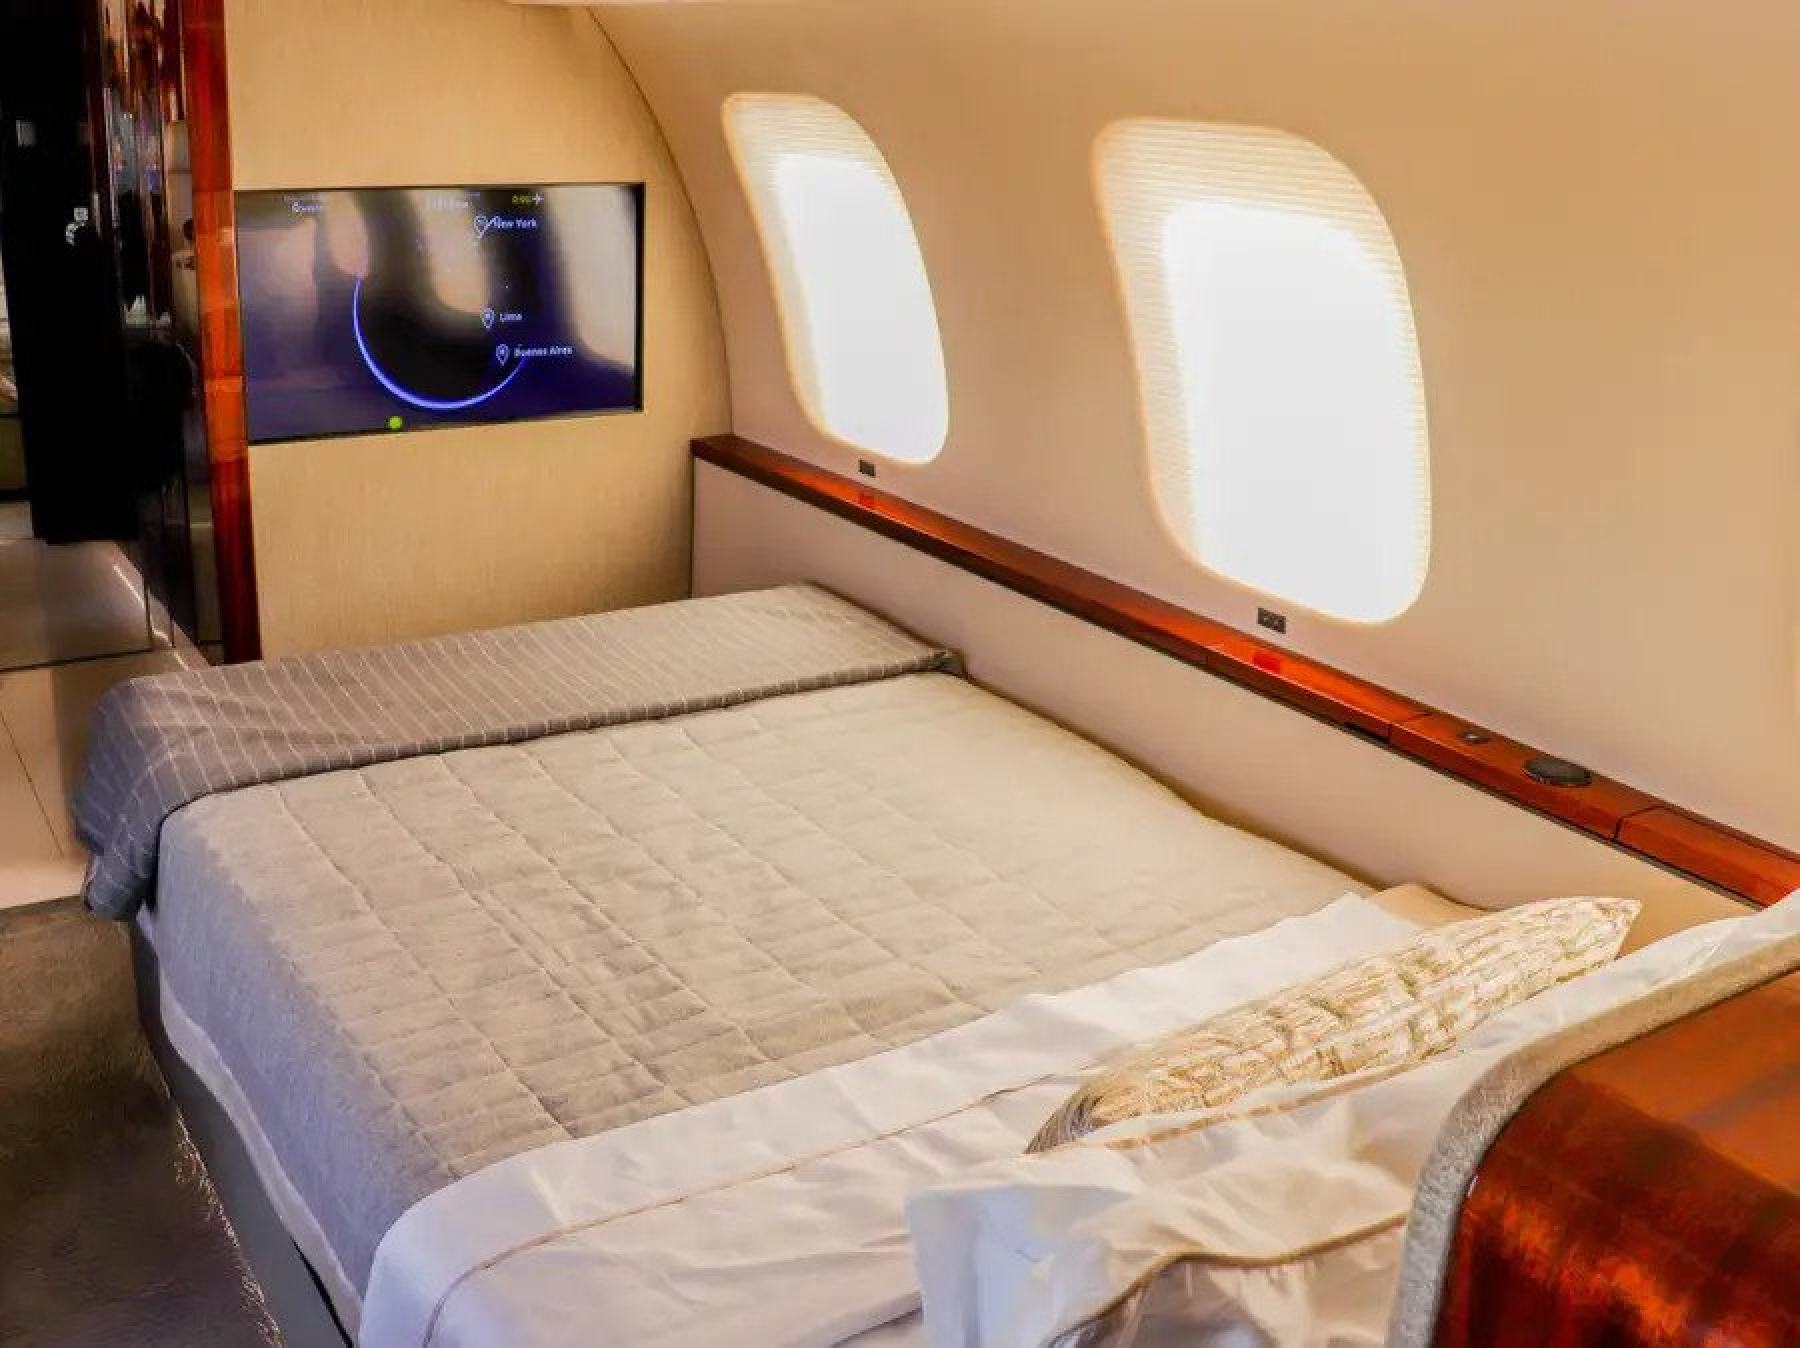 Sleeping on a private jet | Admiral Jet